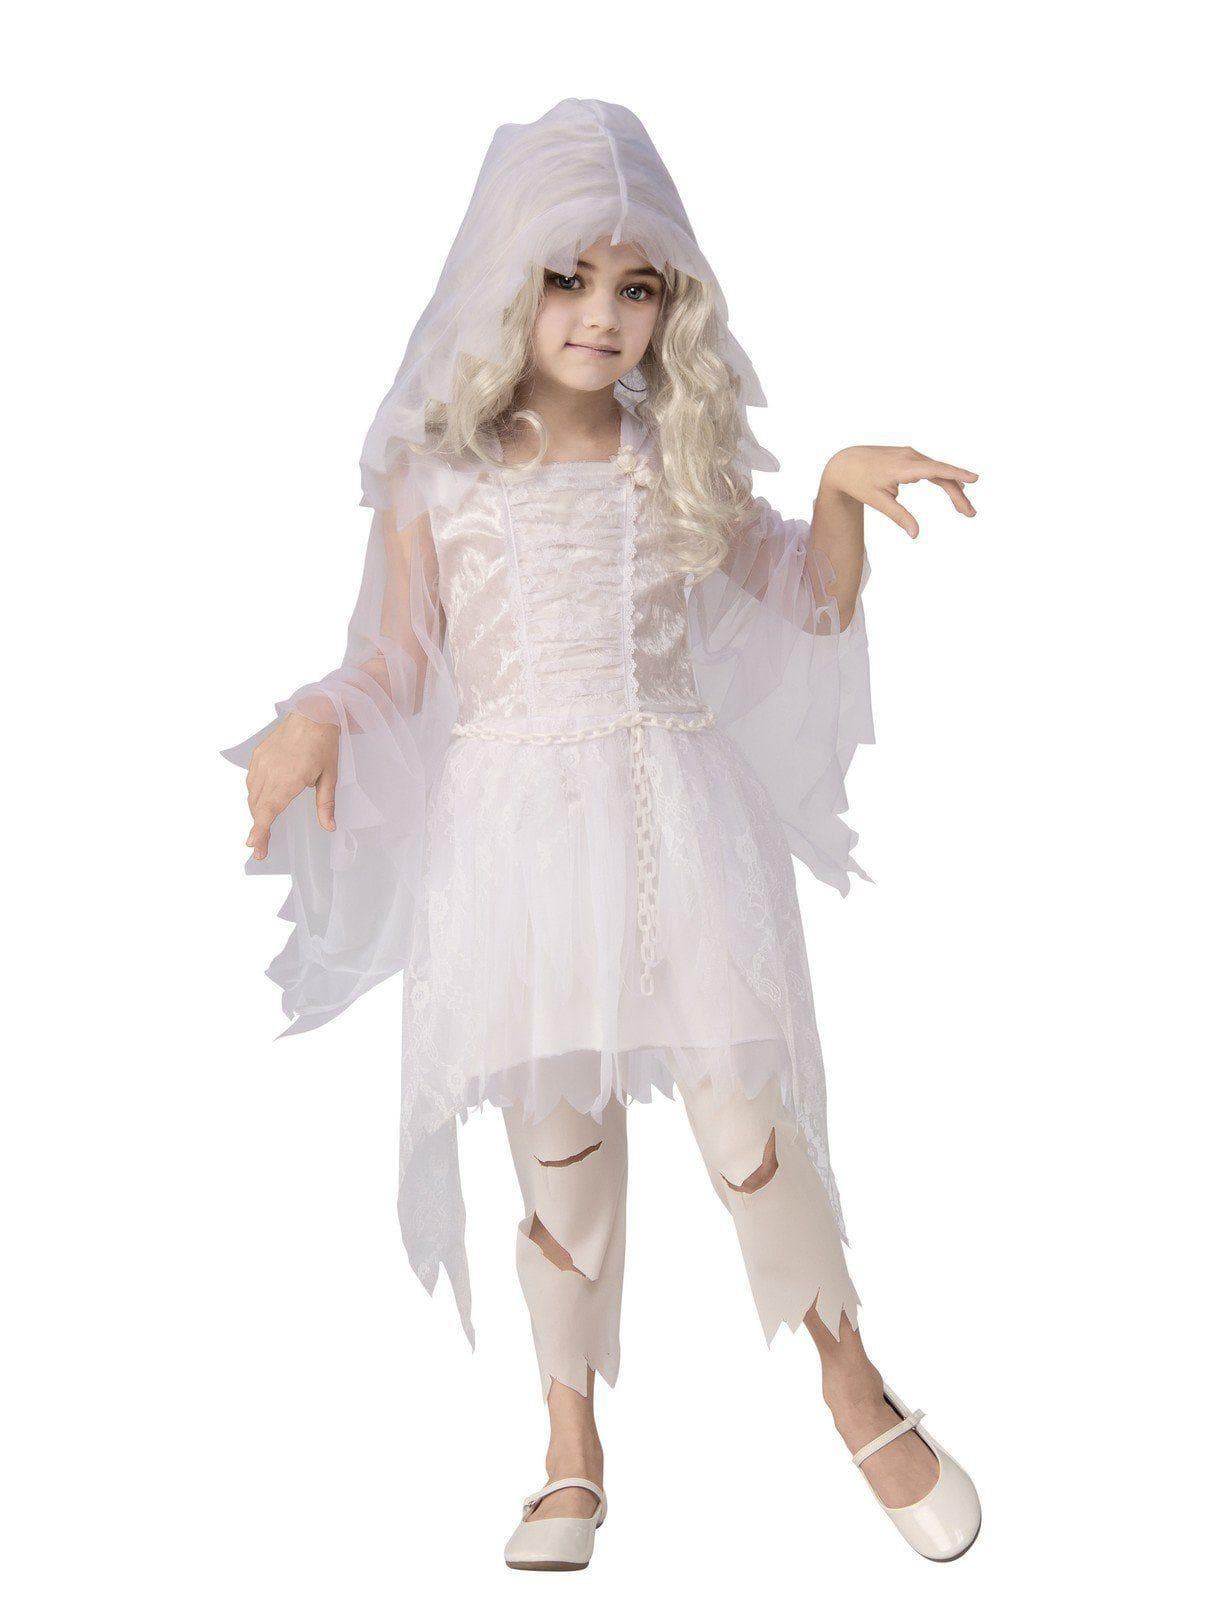 Kids Ghostly Girl Costume - costumes.com